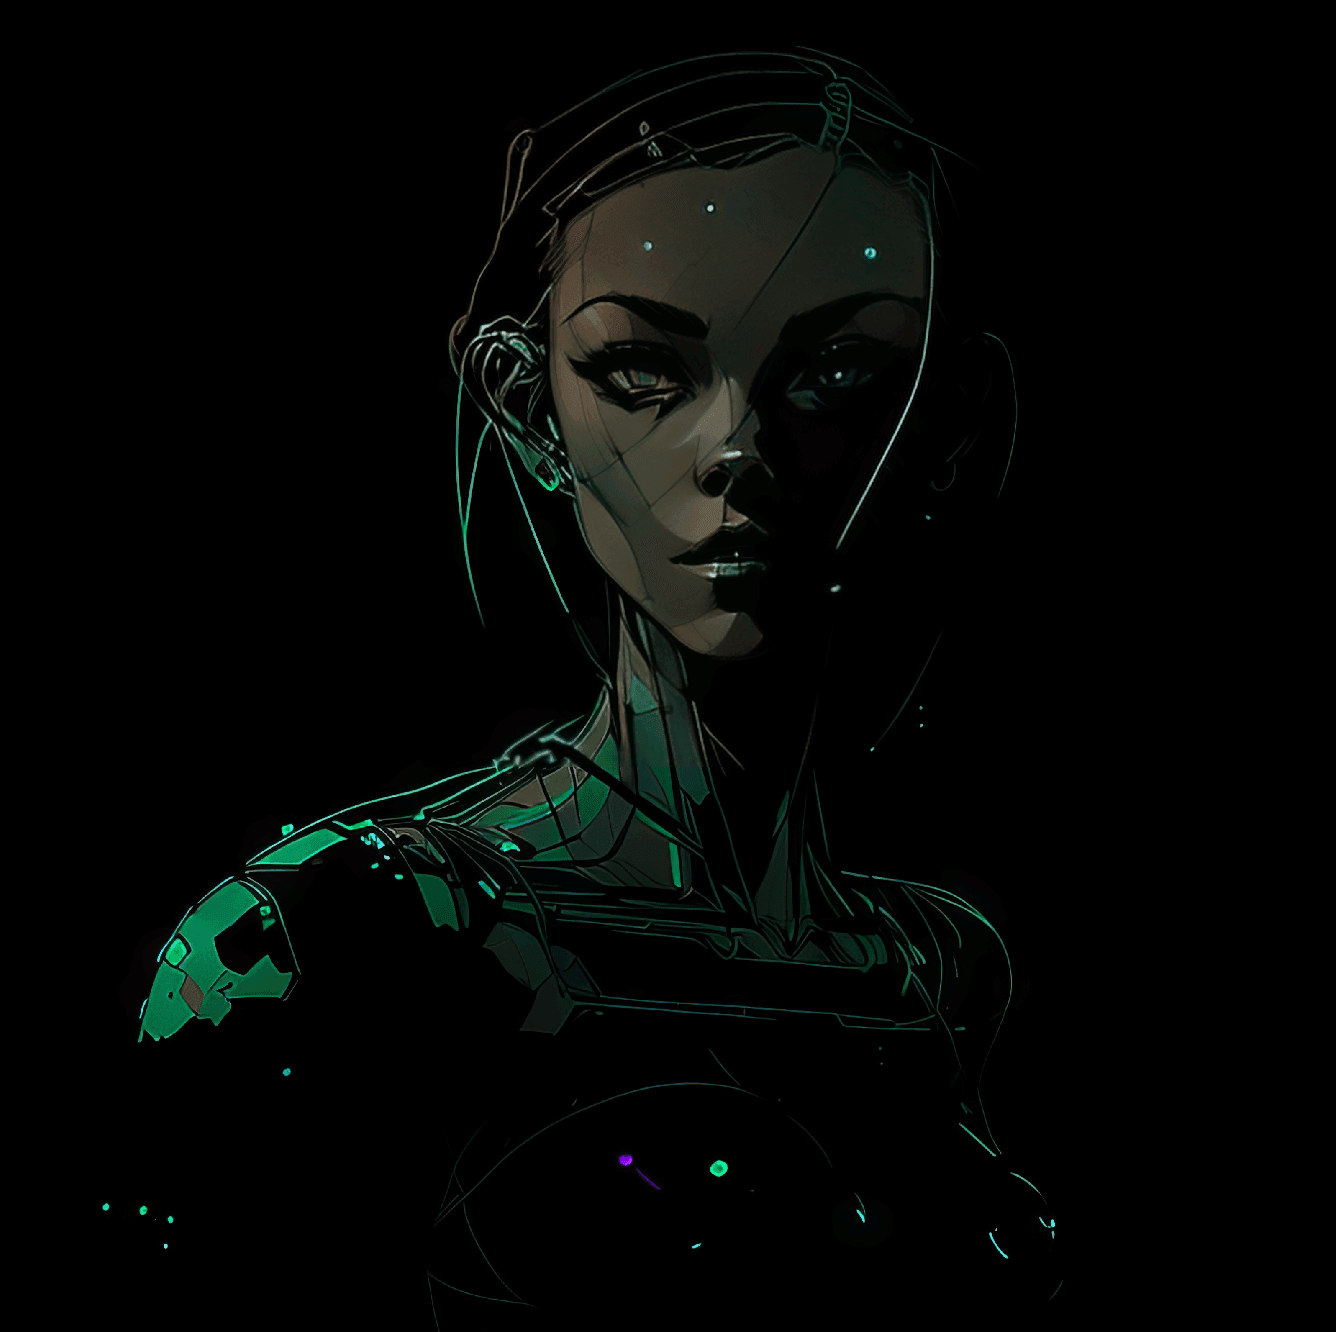 An android in a dark room